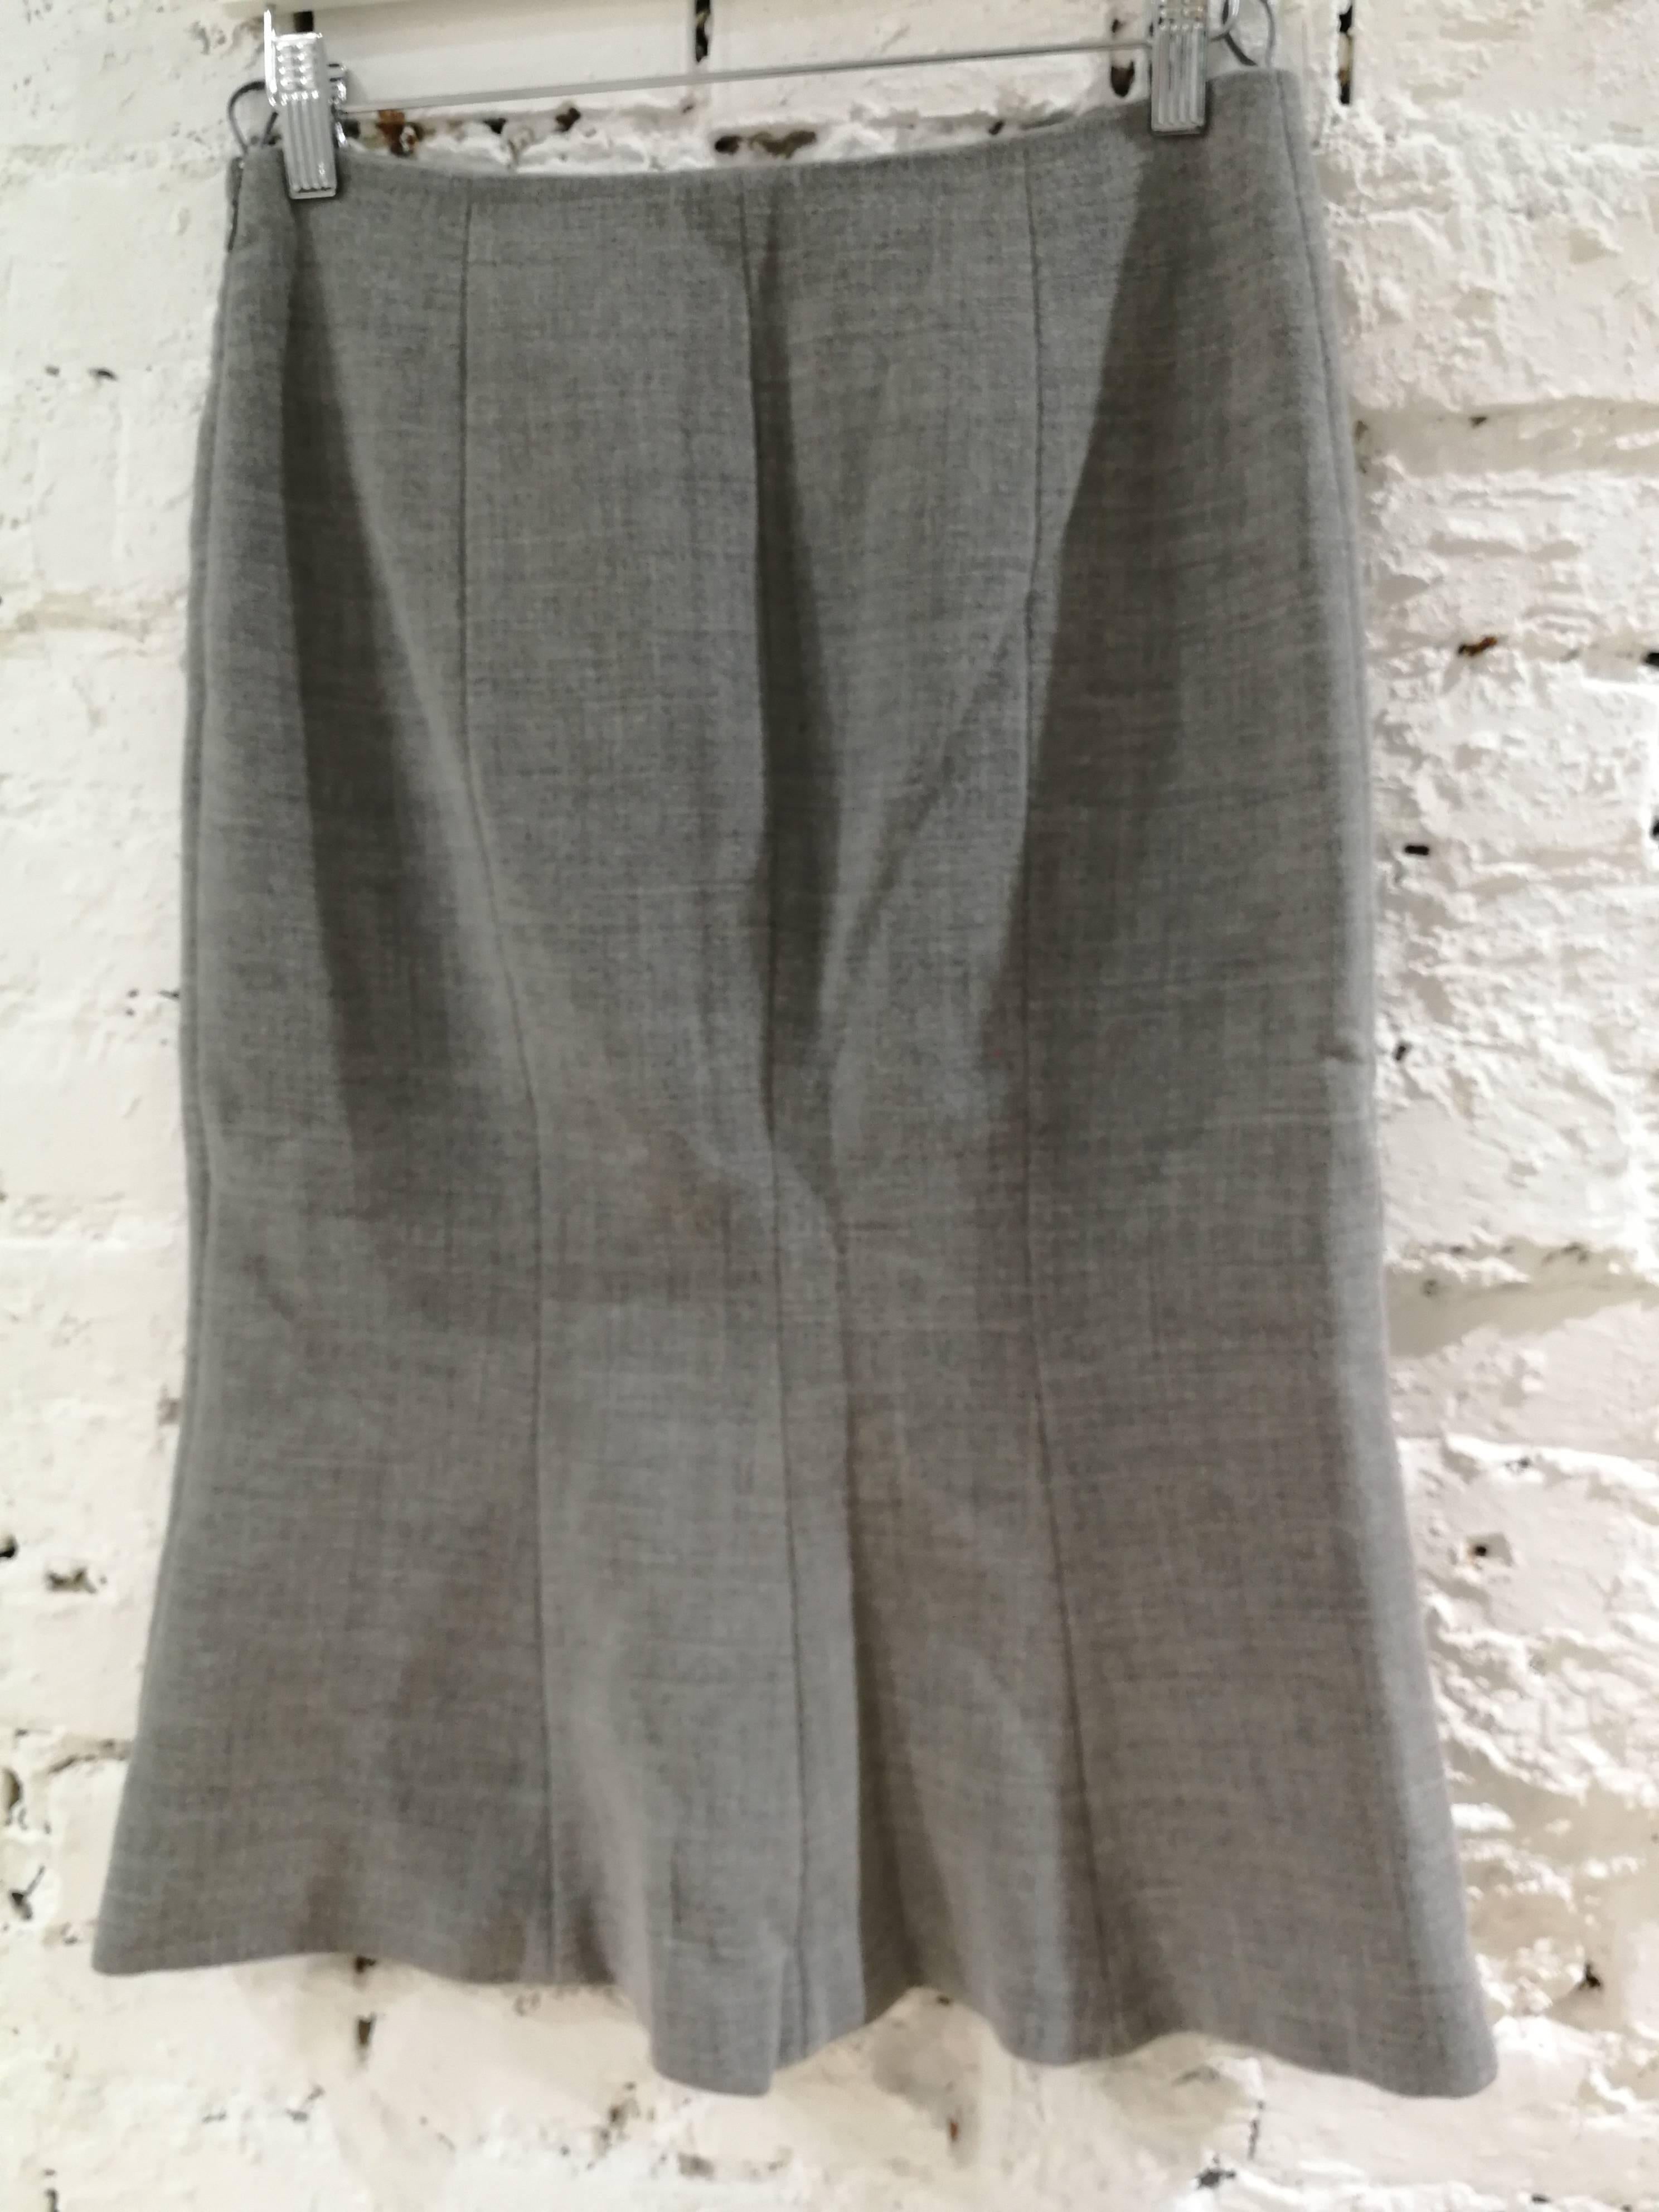 Moschino Grey Wool Skirt

Totally made in italy in size 40